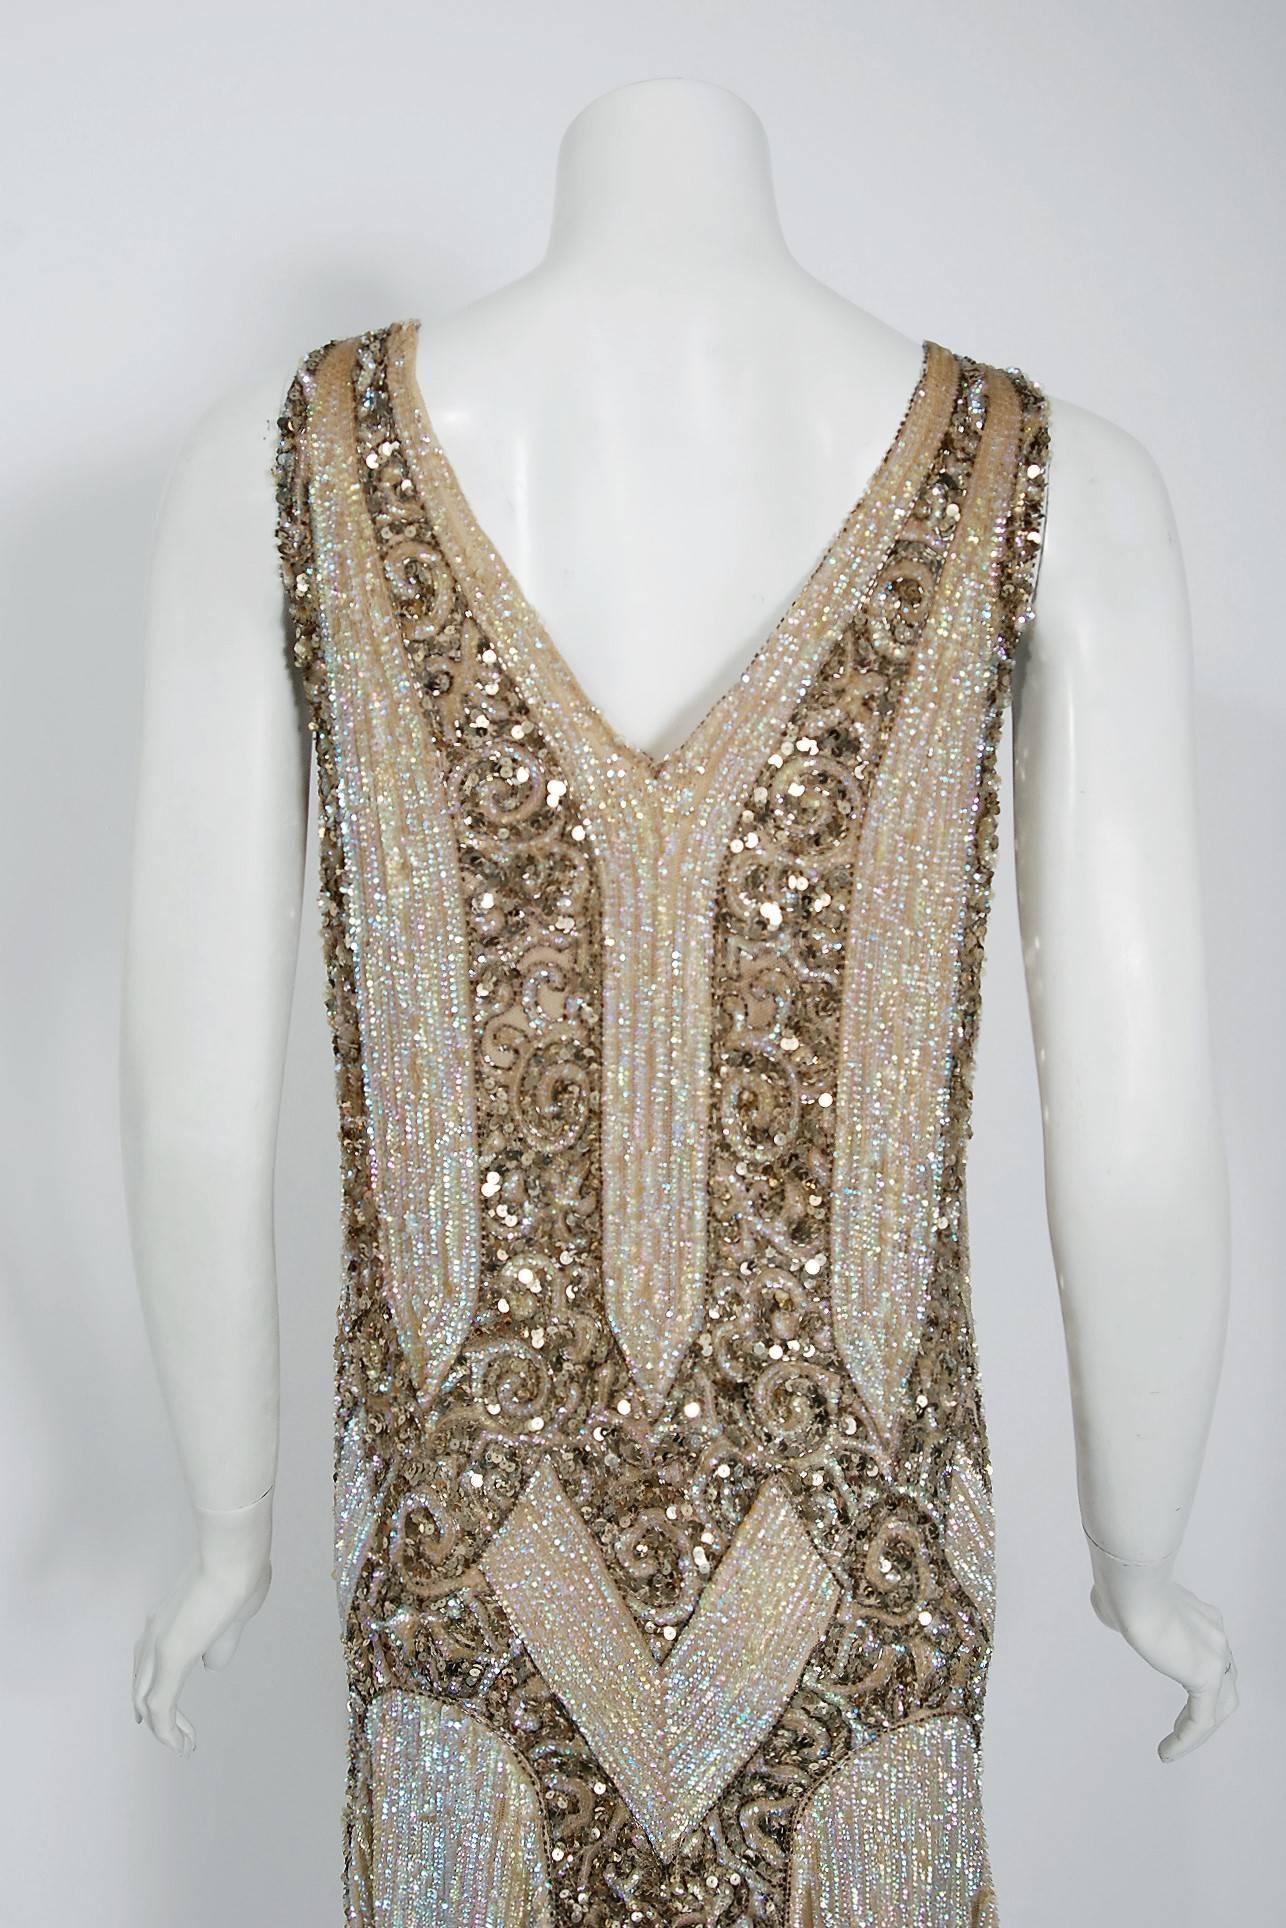 Women's 1920's French Couture Champagne Golden Beaded Sequin Art Deco Flapper Dress